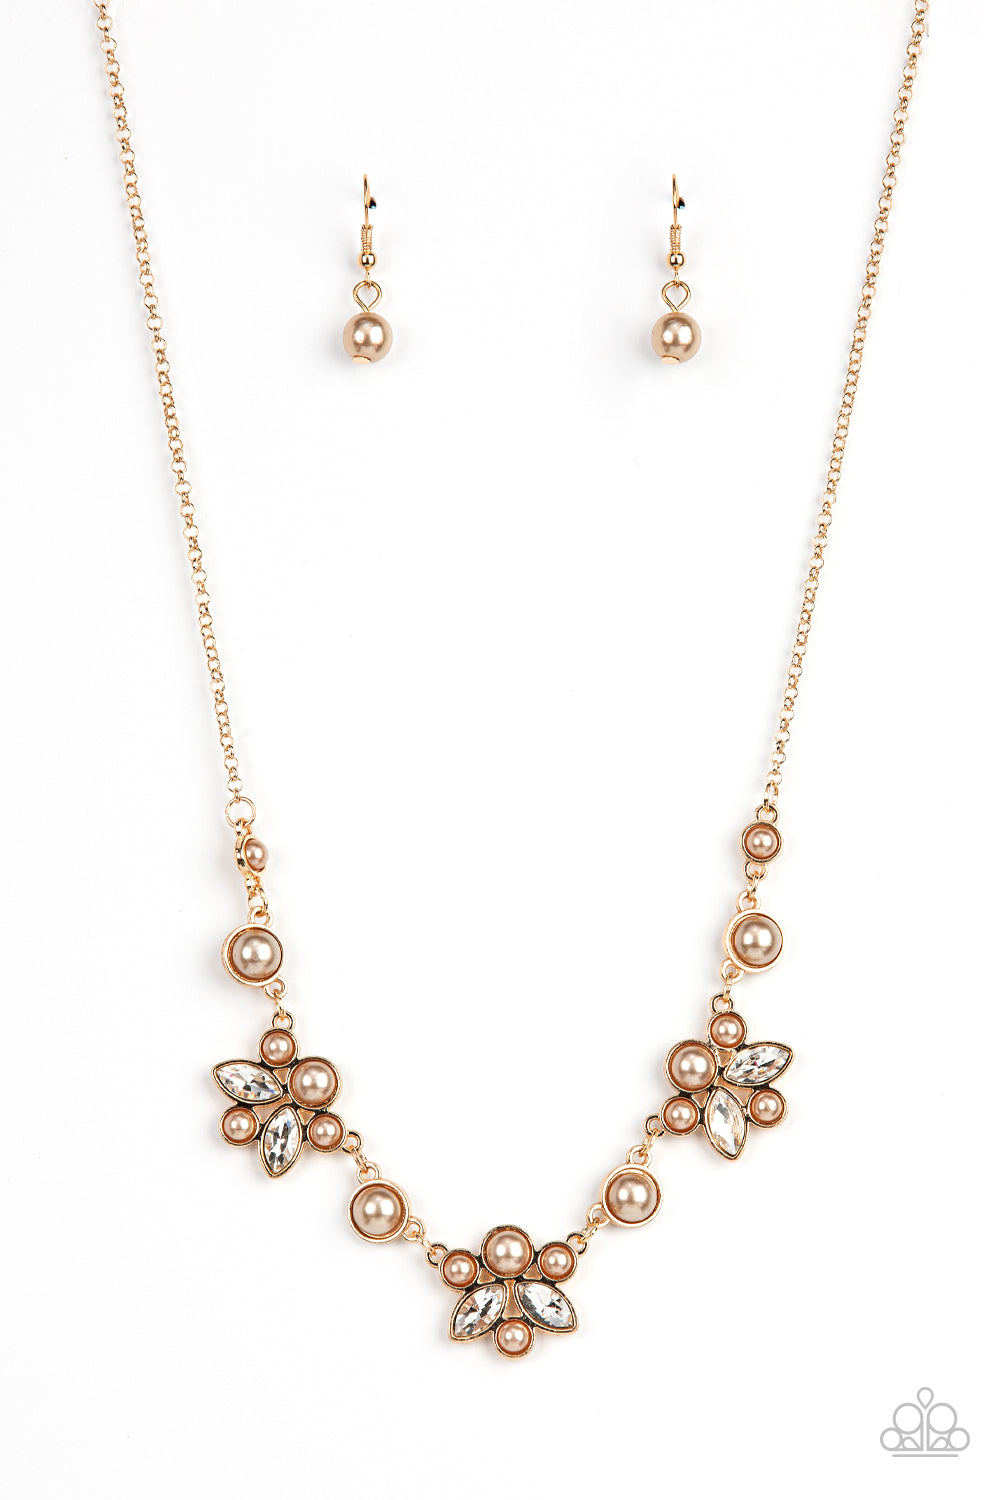 Royally Ever After - brown - Paparazzi necklace